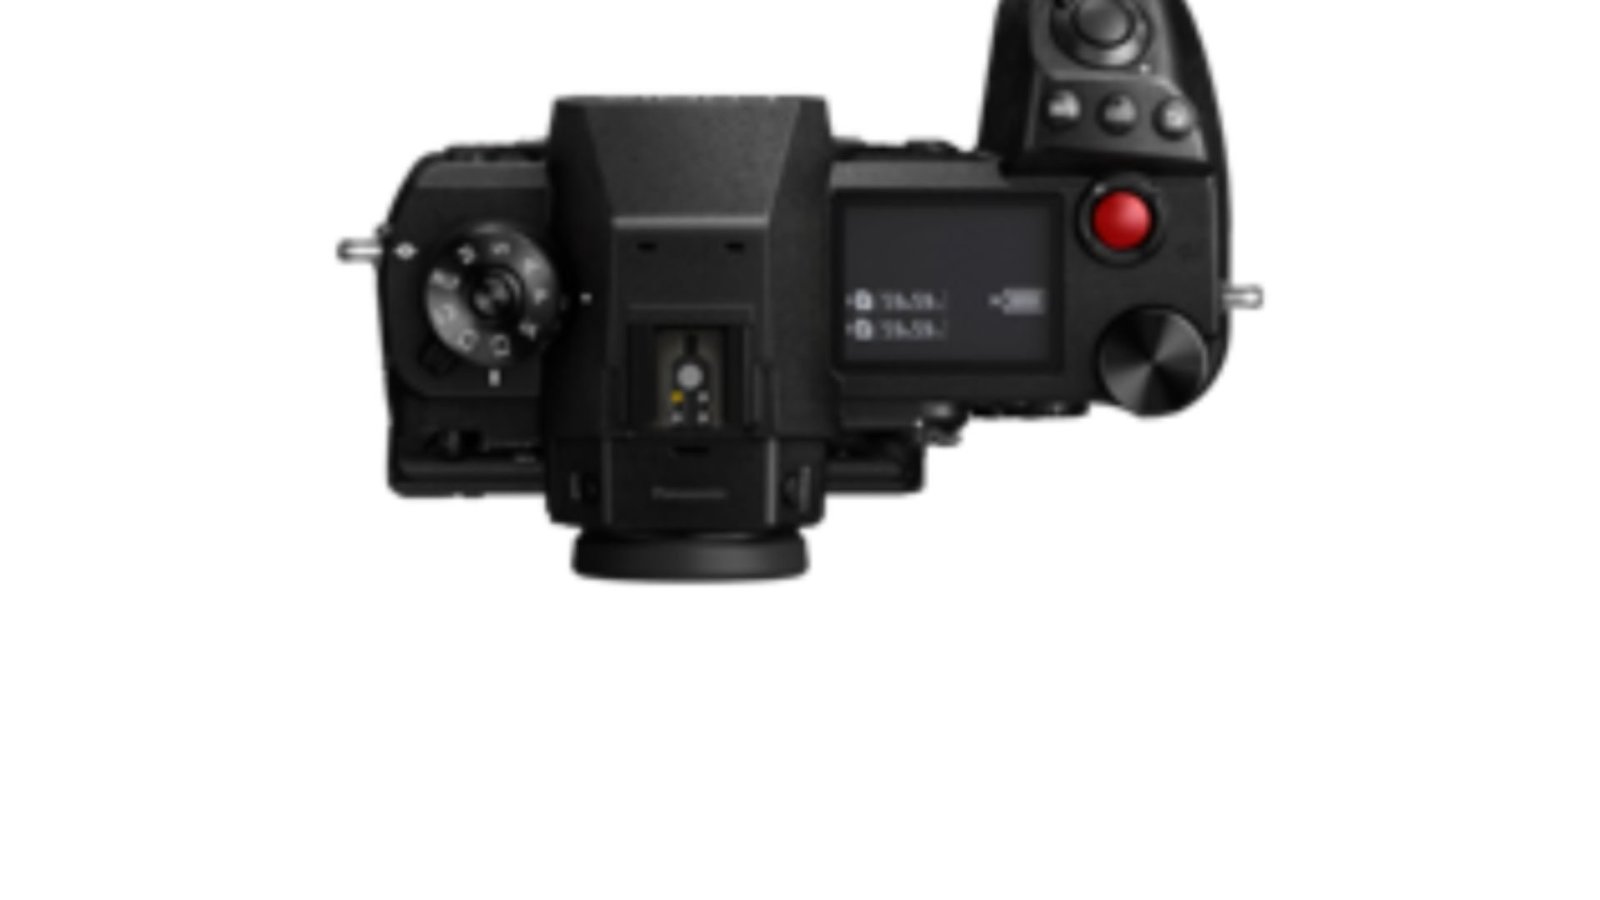 Rent Panasonic Lumix S1H Camera with Cp.3 Lens Kit in Delhi NCR, Rent Camera, Camera accessories, Camera lenses for rent, in Delhi Gurgaon Noida, hire Shooting equipment, Lighting equipment rental, Film gear rental for Video production, camera rental company in Delhi, film equipment rental company